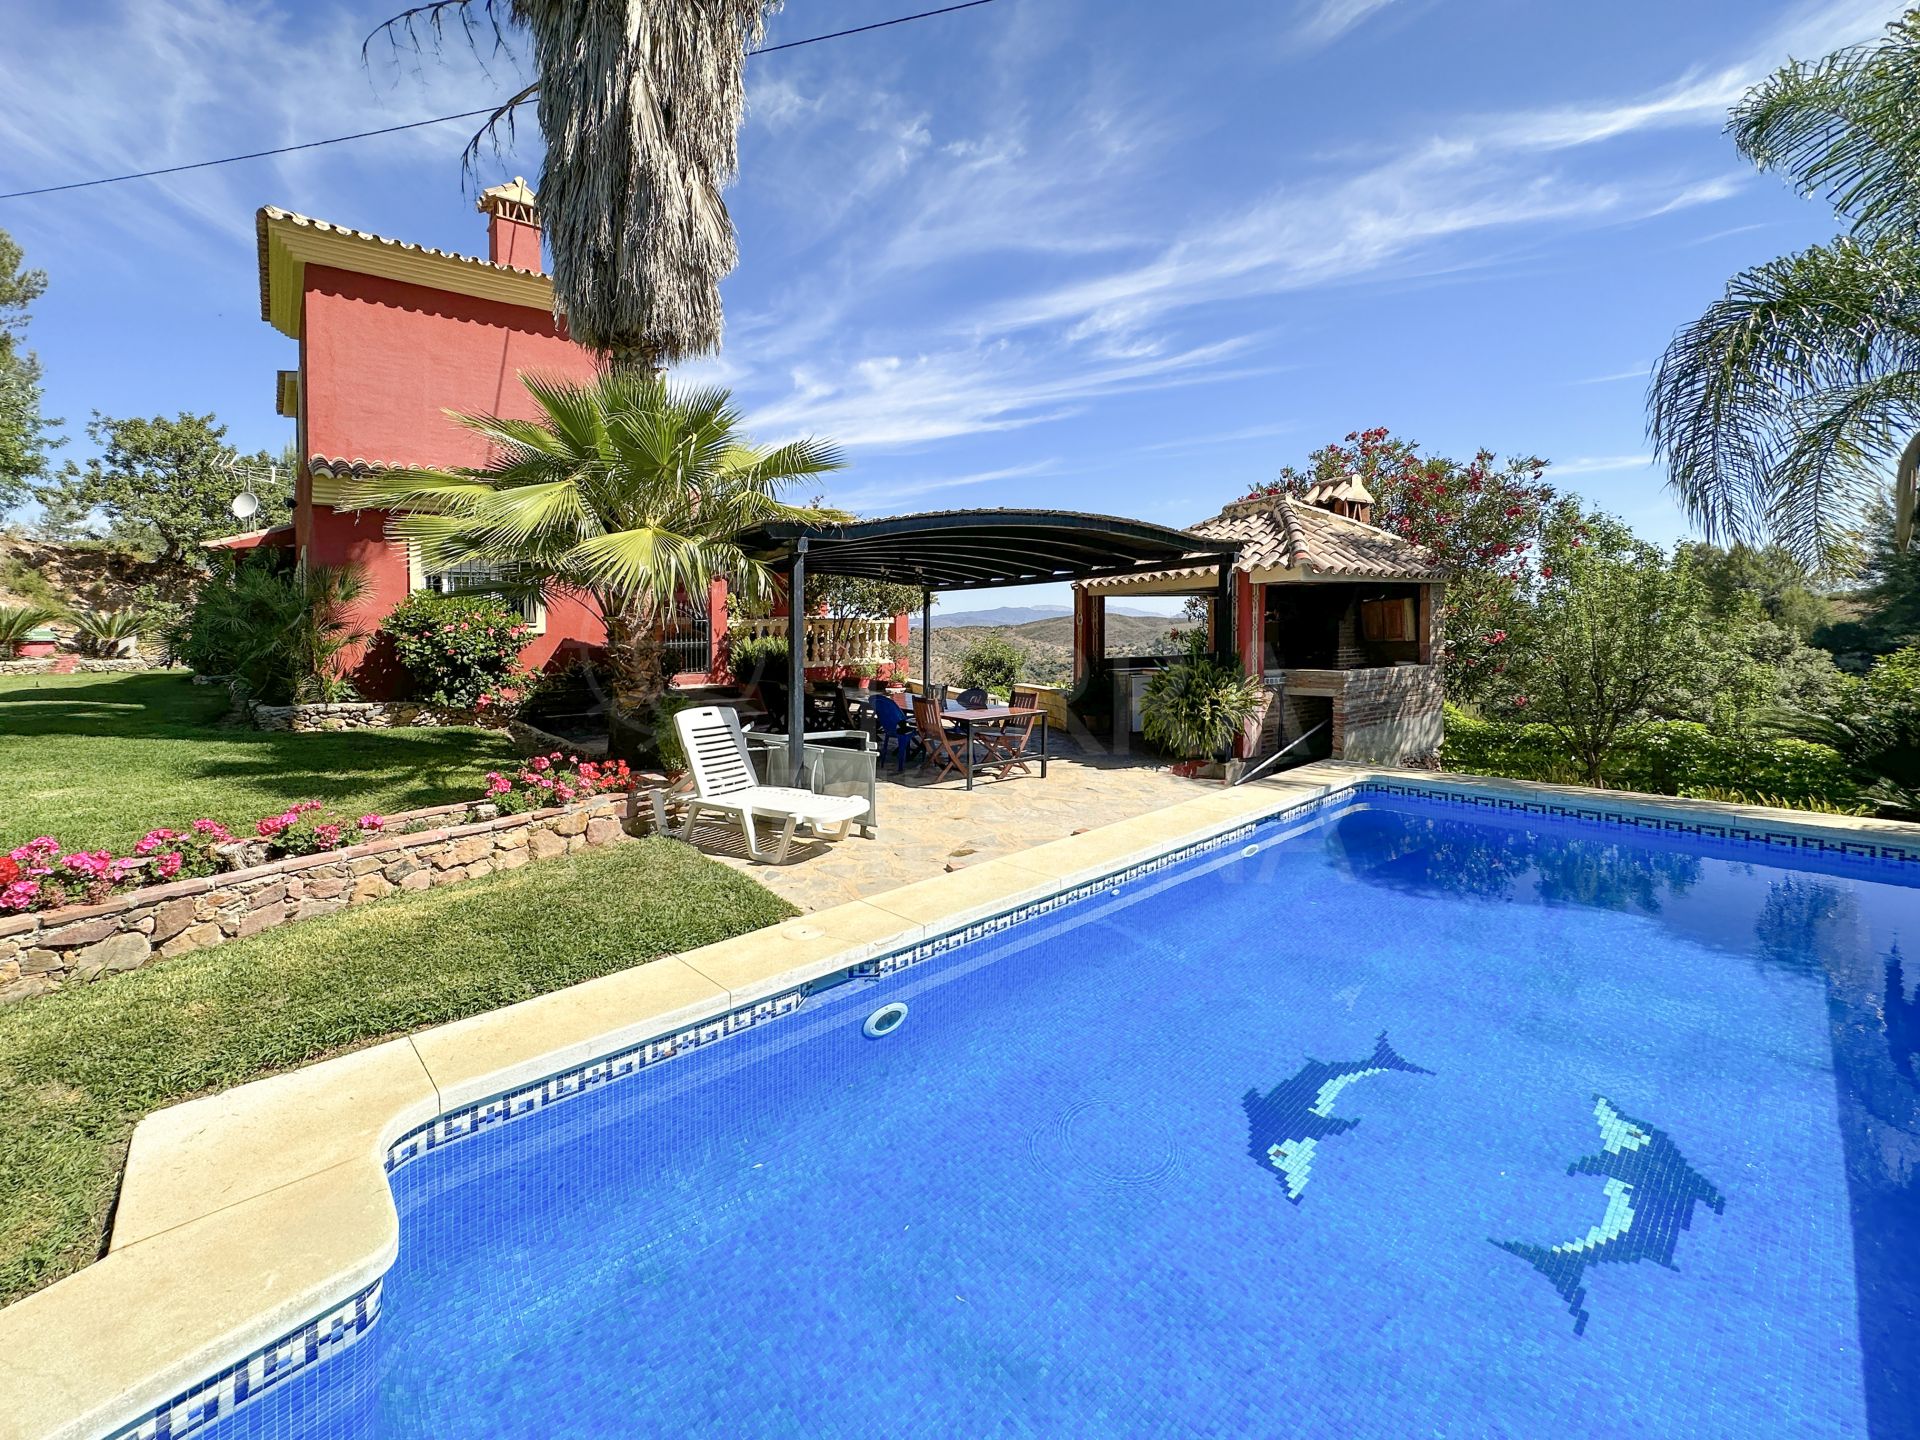 Fabulous villa with 6 bedrooms and guest apartment for sale in Monda, Malaga.